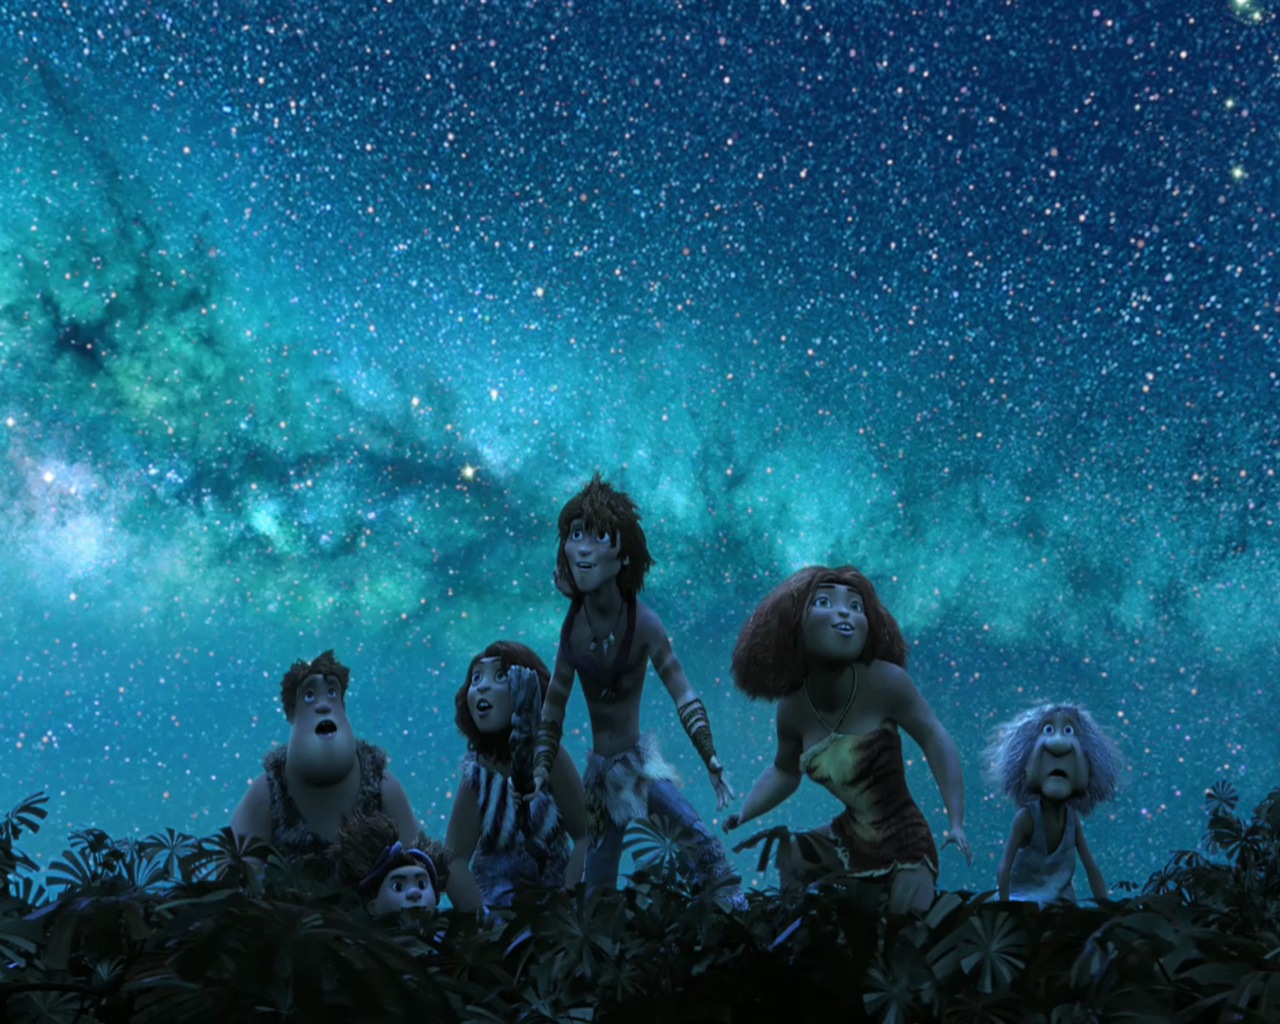 V Croods HD Movie Wallpapers #16 - 1280x1024